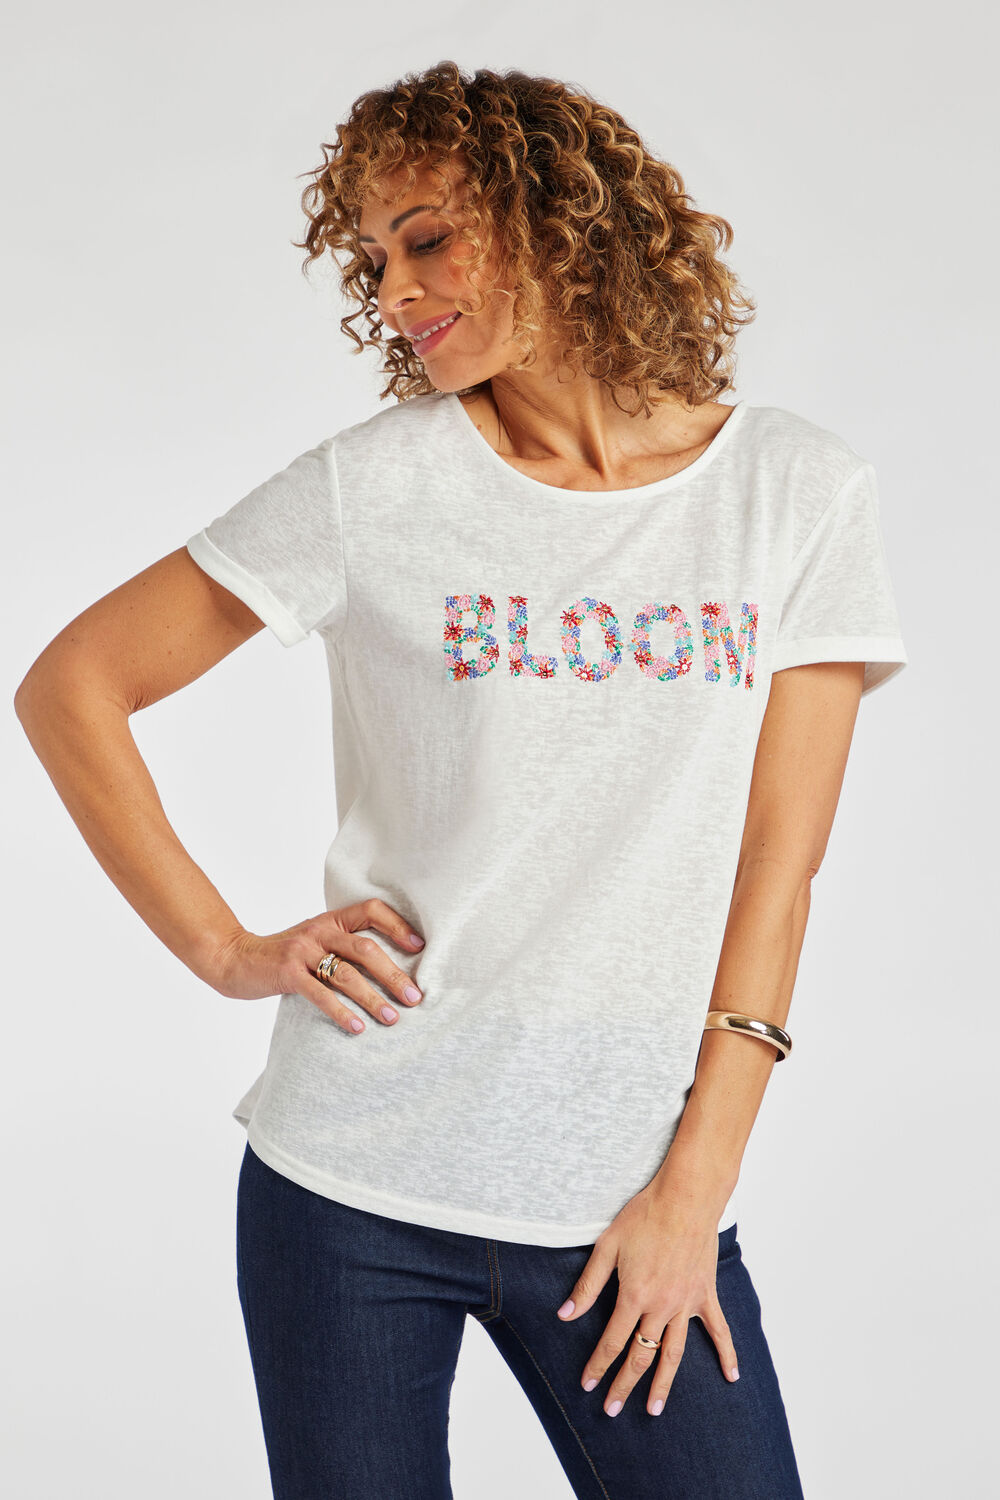 Bonmarche White Short Sleeve Bloom Embroidered T-Shirt, Size: 16